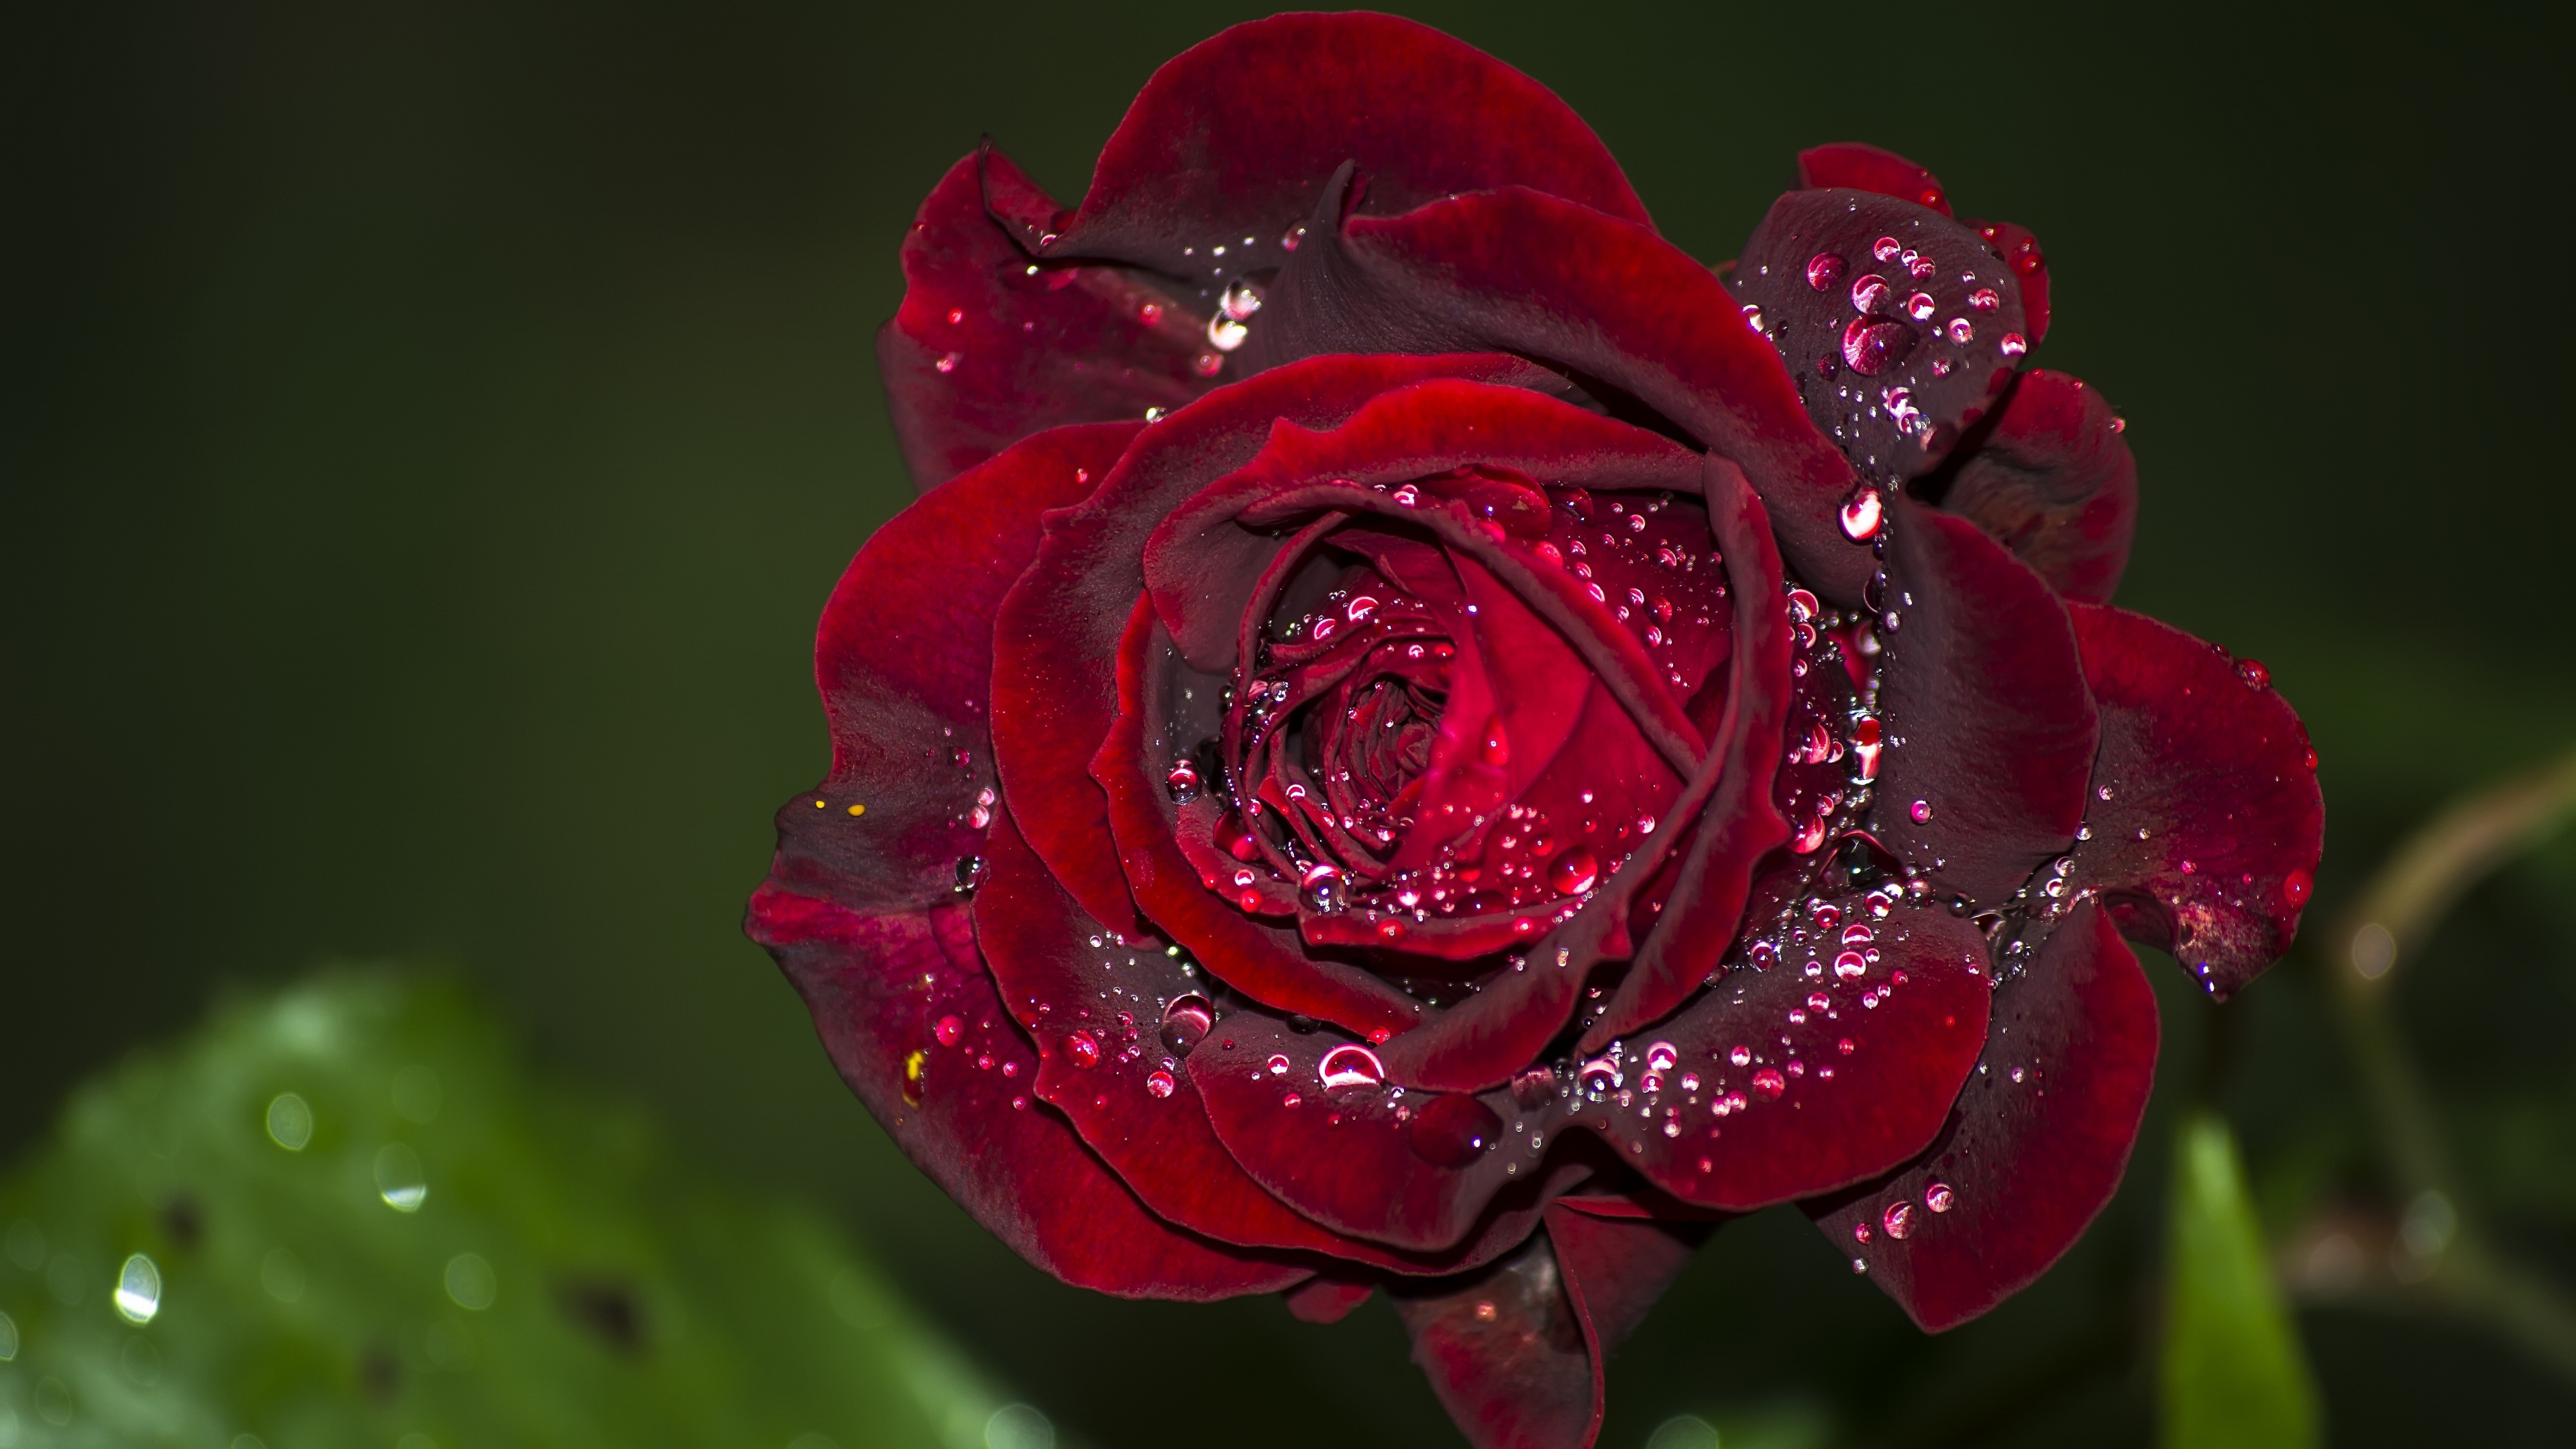 Red Rose in Bloom With Dew Drops. Wallpaper in 3840x2160 Resolution